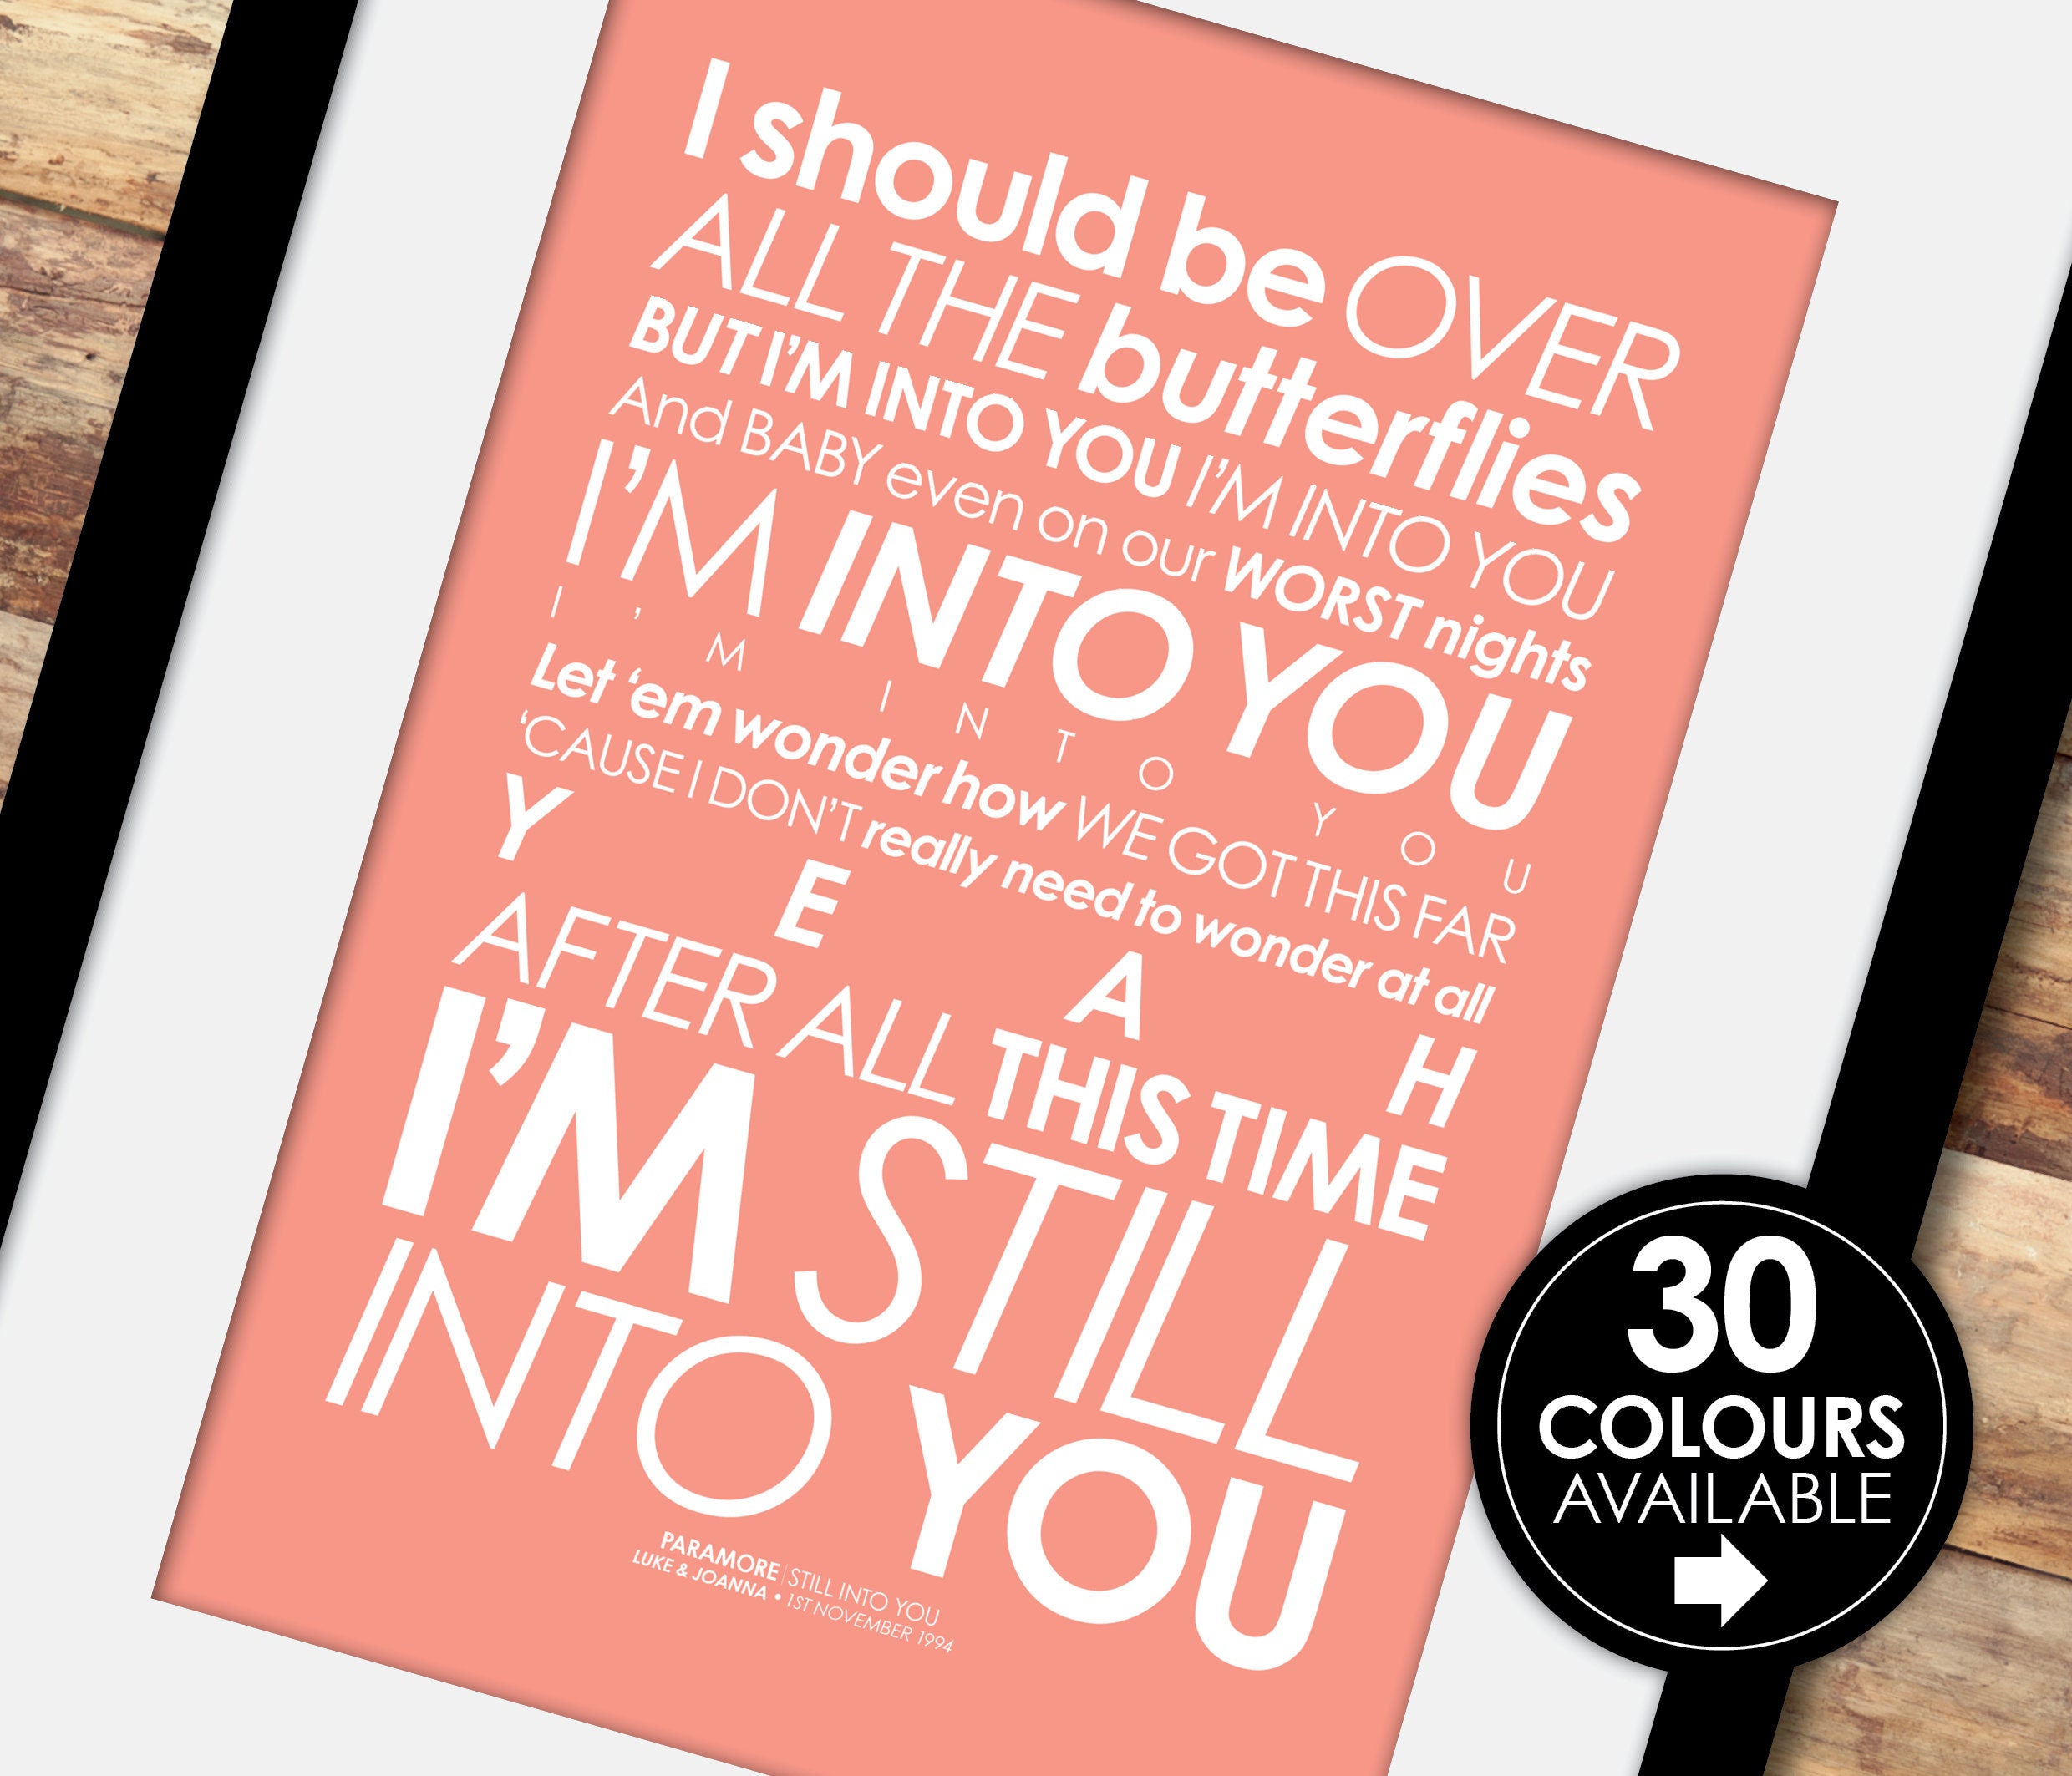 Still Into You Lyrics Print Paramore Optional PERSONALISED MESSAGE Fits  Ikea Frame Anniversary Gift, Motivational, Butterflies, Love 